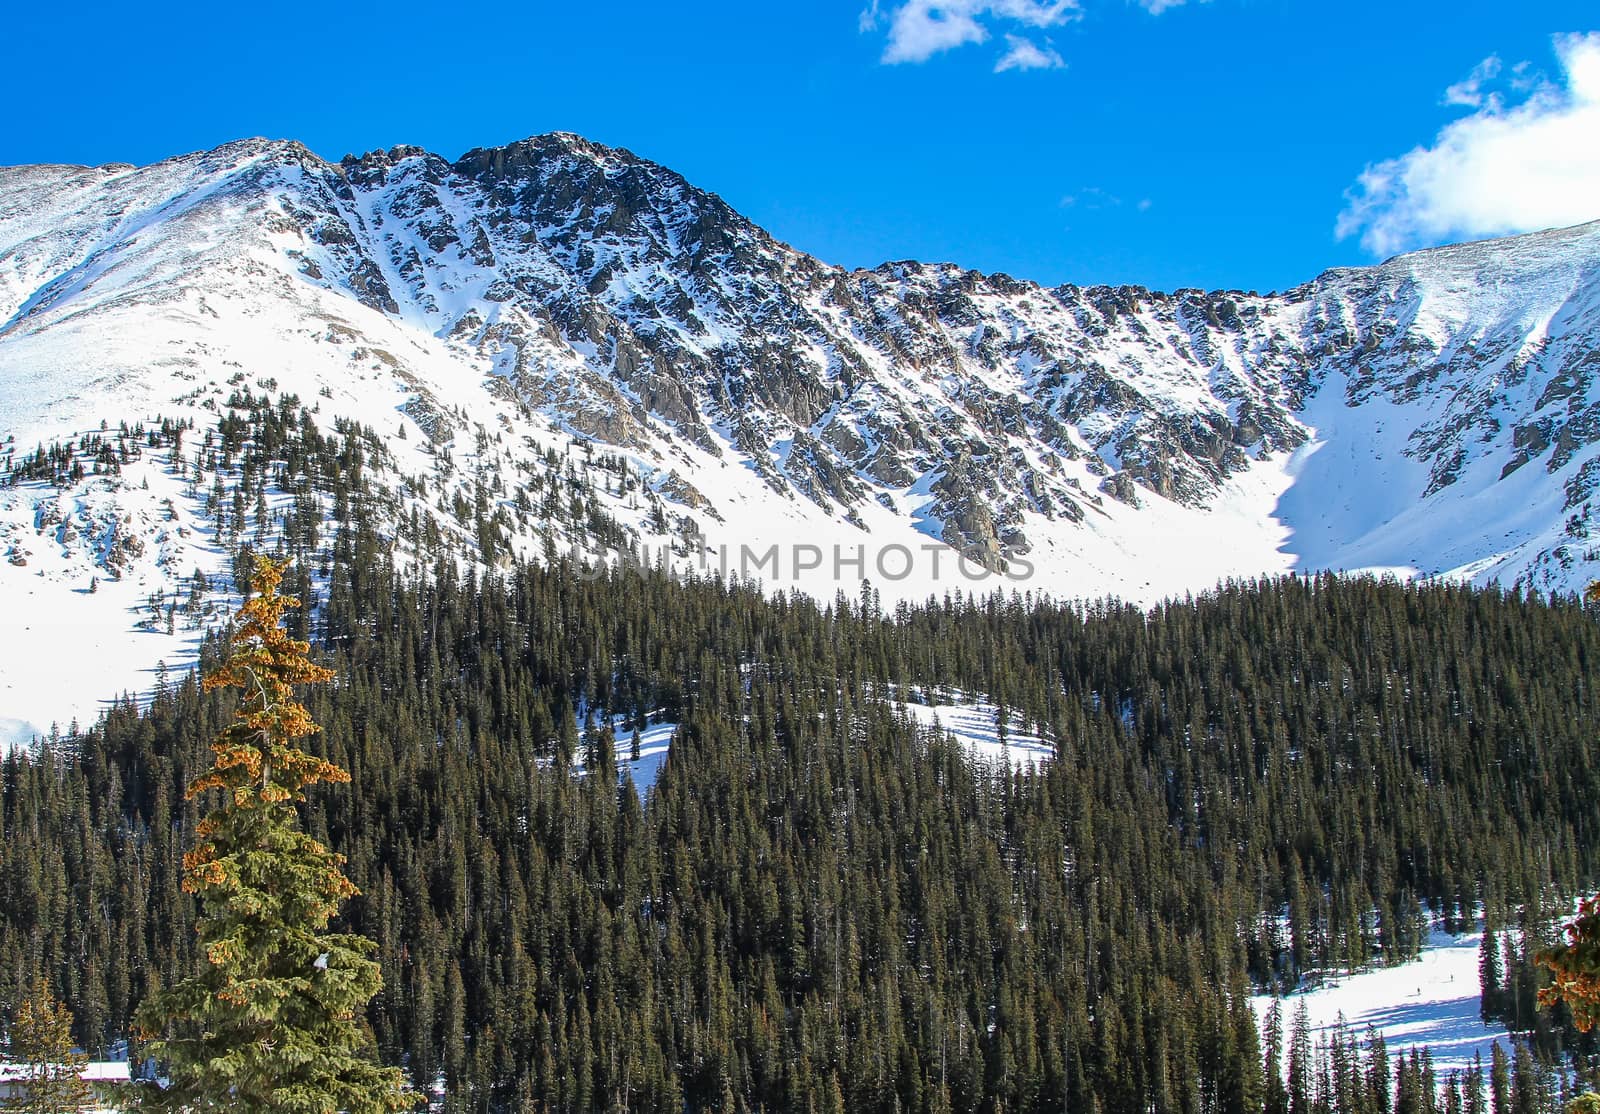 The beautiful snow covered mountains of Colorado.  Lots of pine trees and bright blue sky with some clouds.